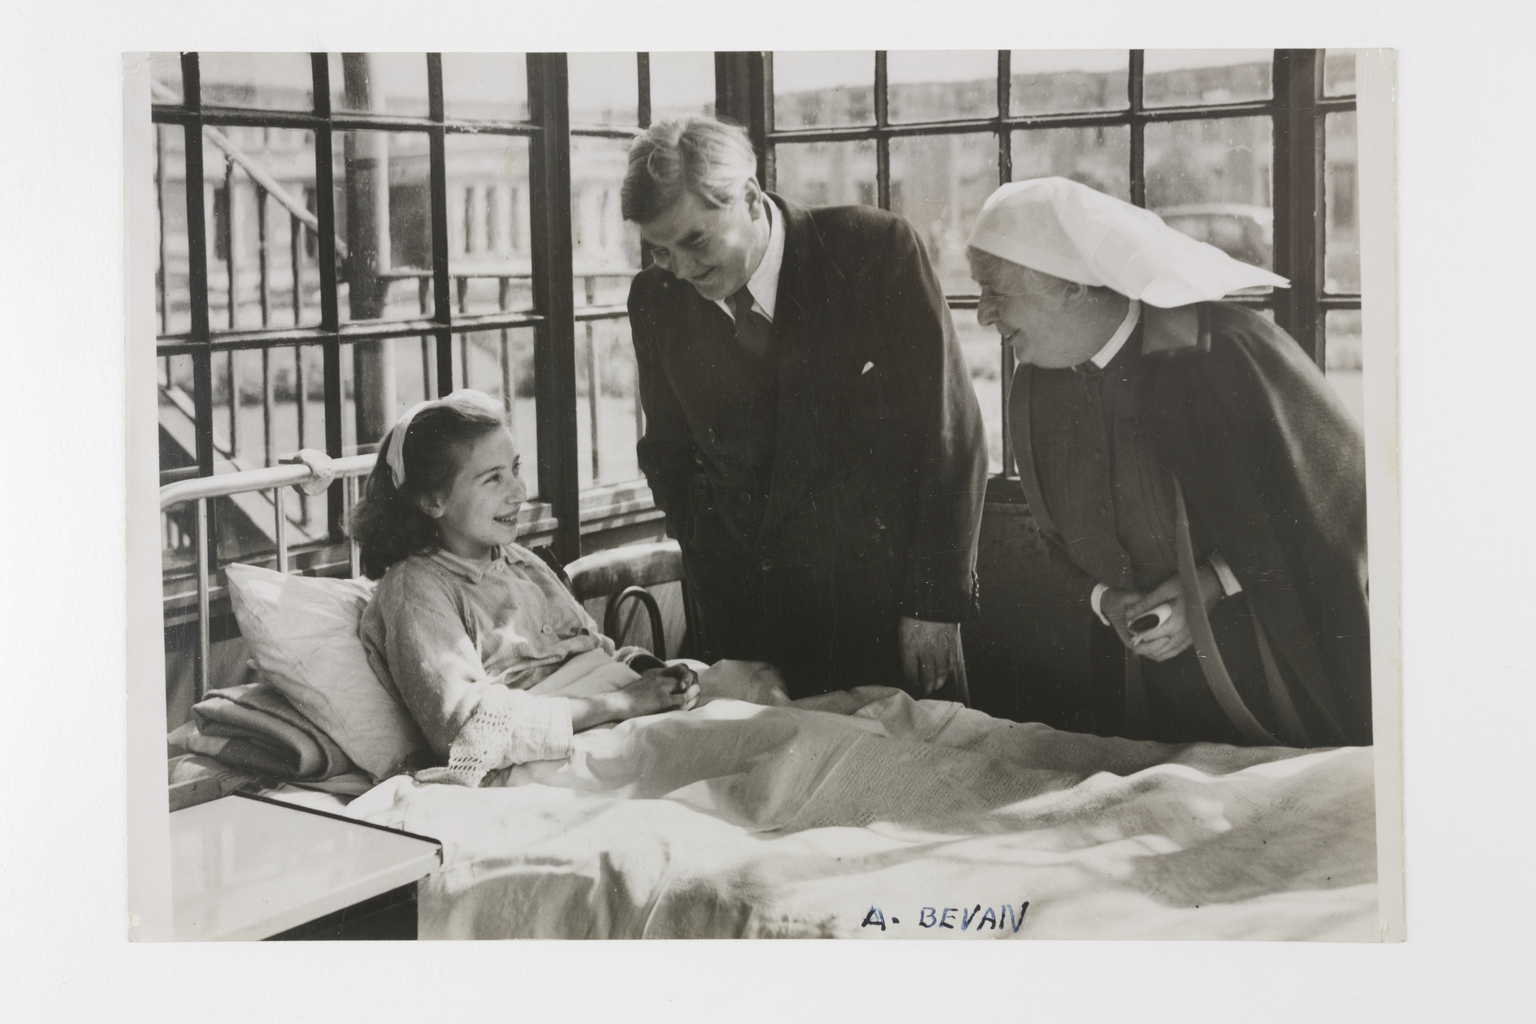 Daily Herald photograph showing Aneurin Bevan visiting Silvia Beckenham, the first NHS patient.